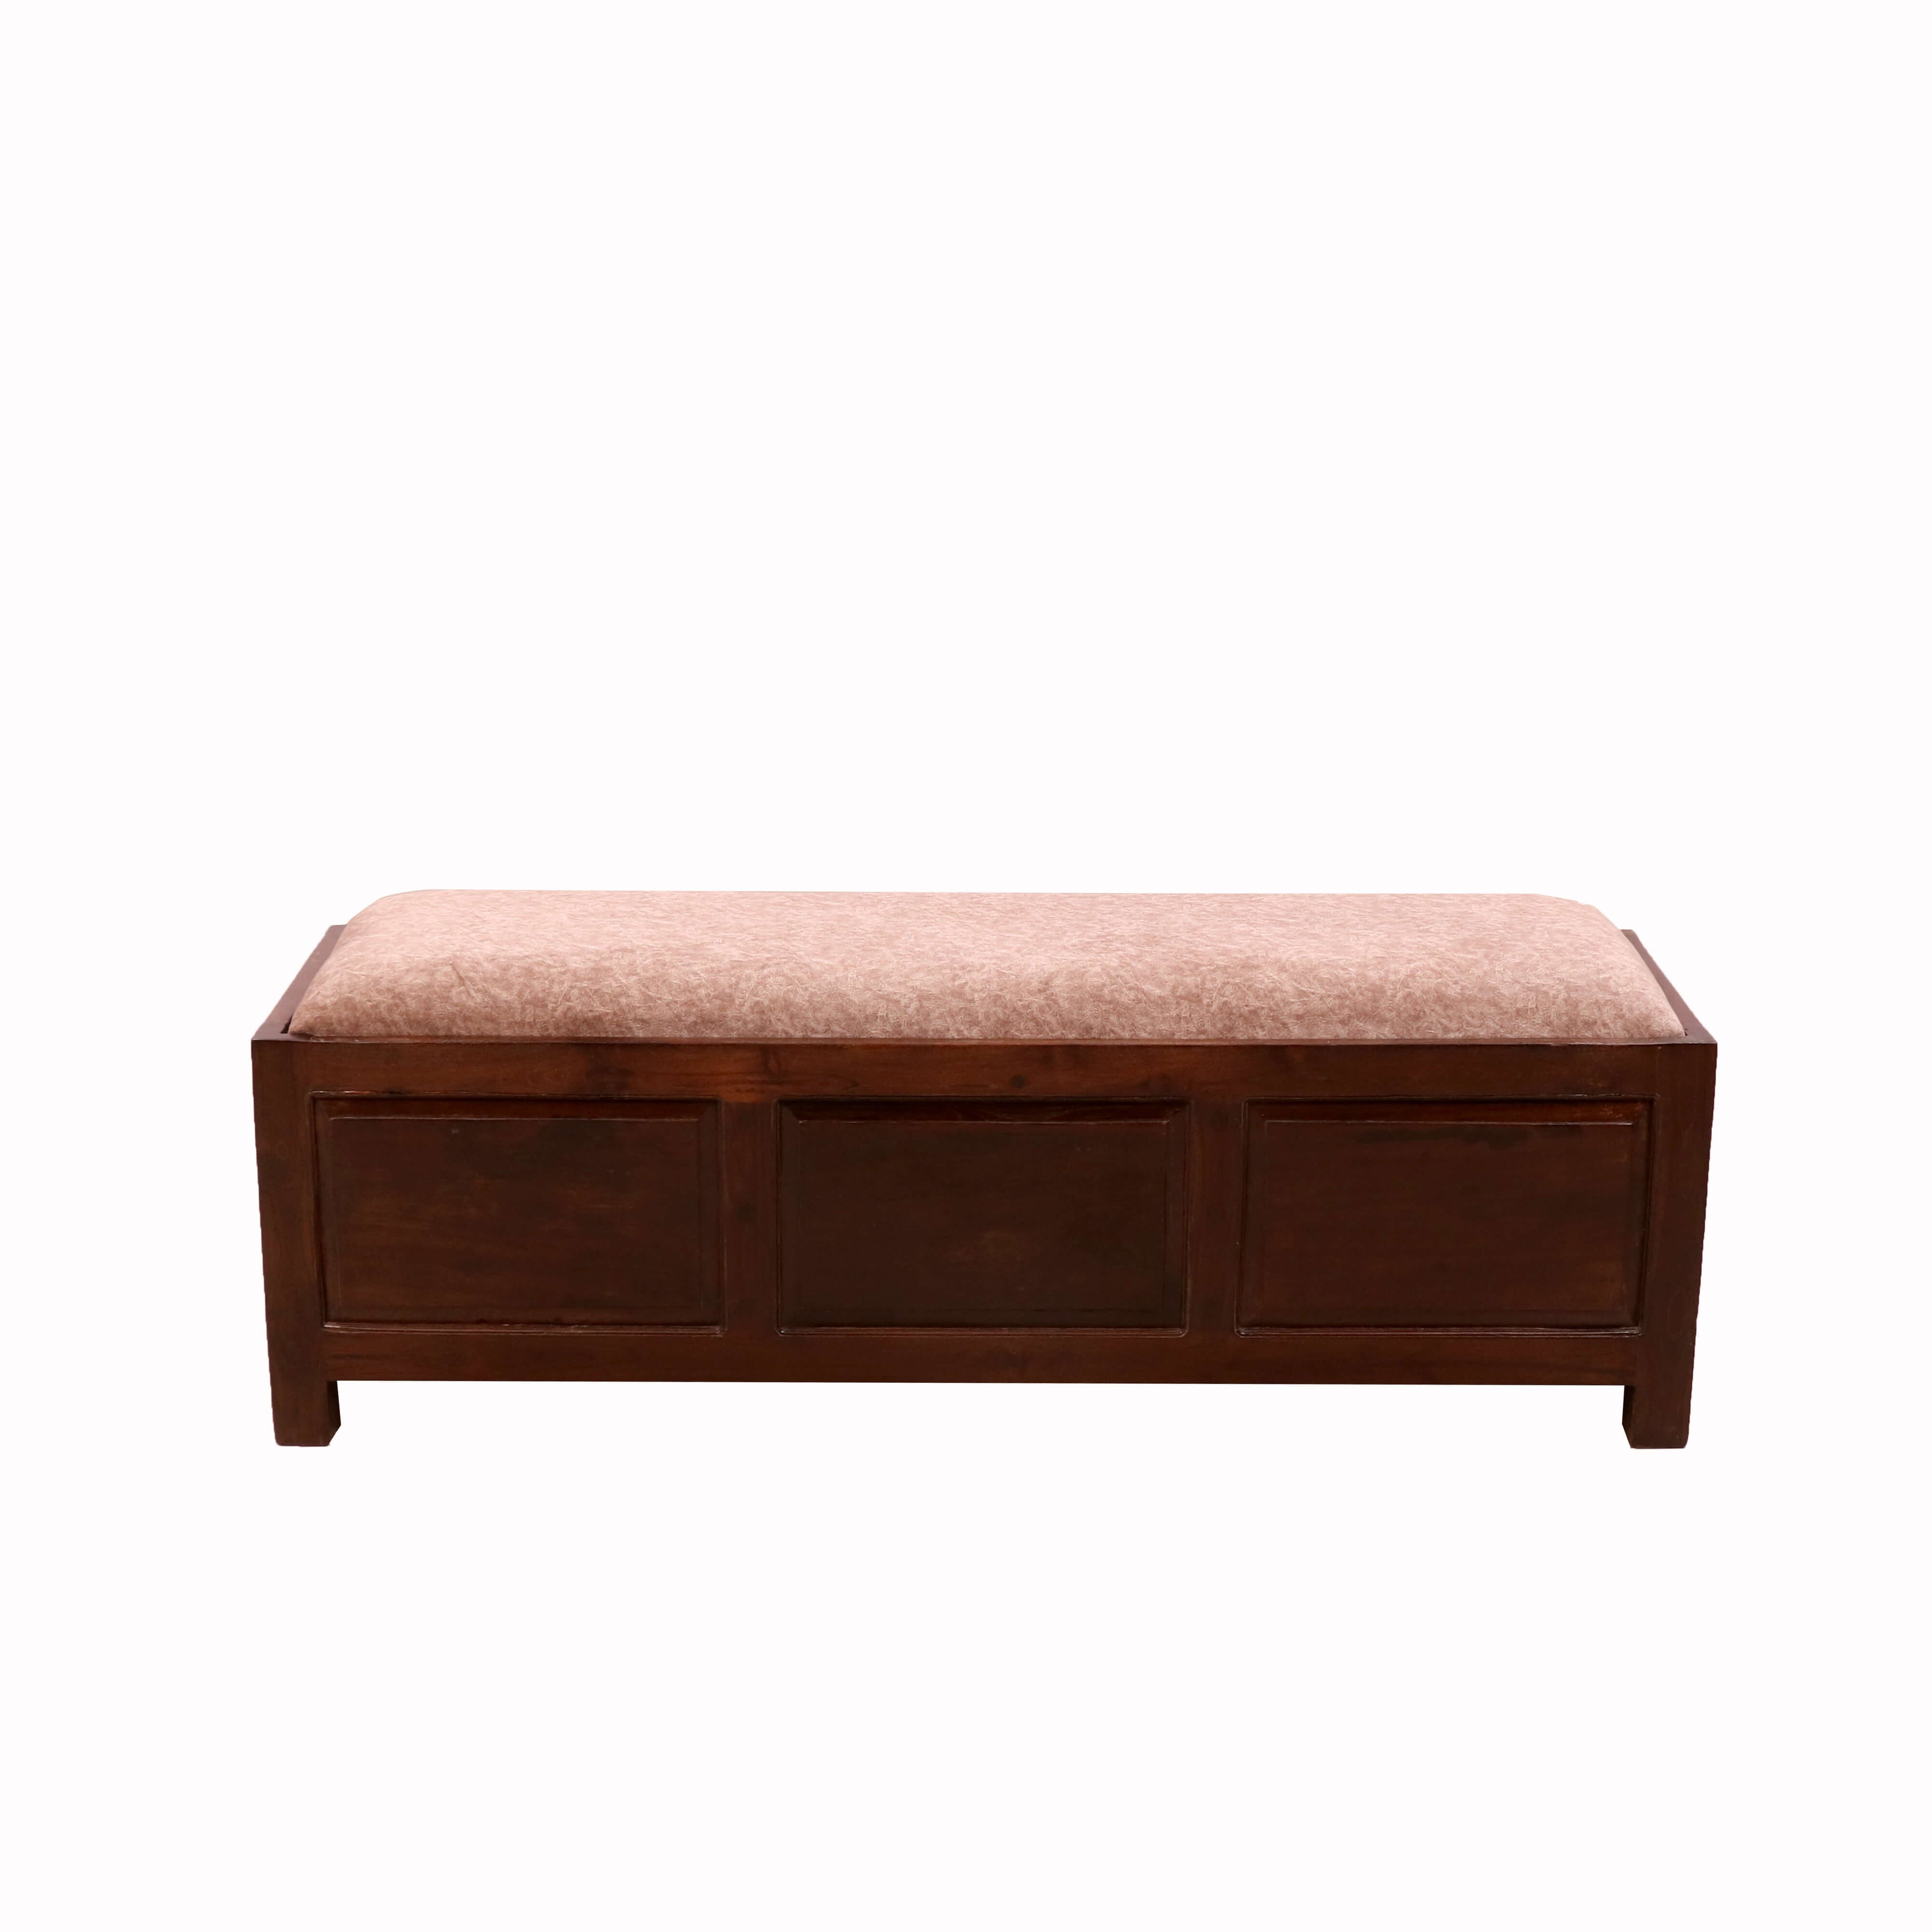 Simple endearment 3 Seat with storage Bench